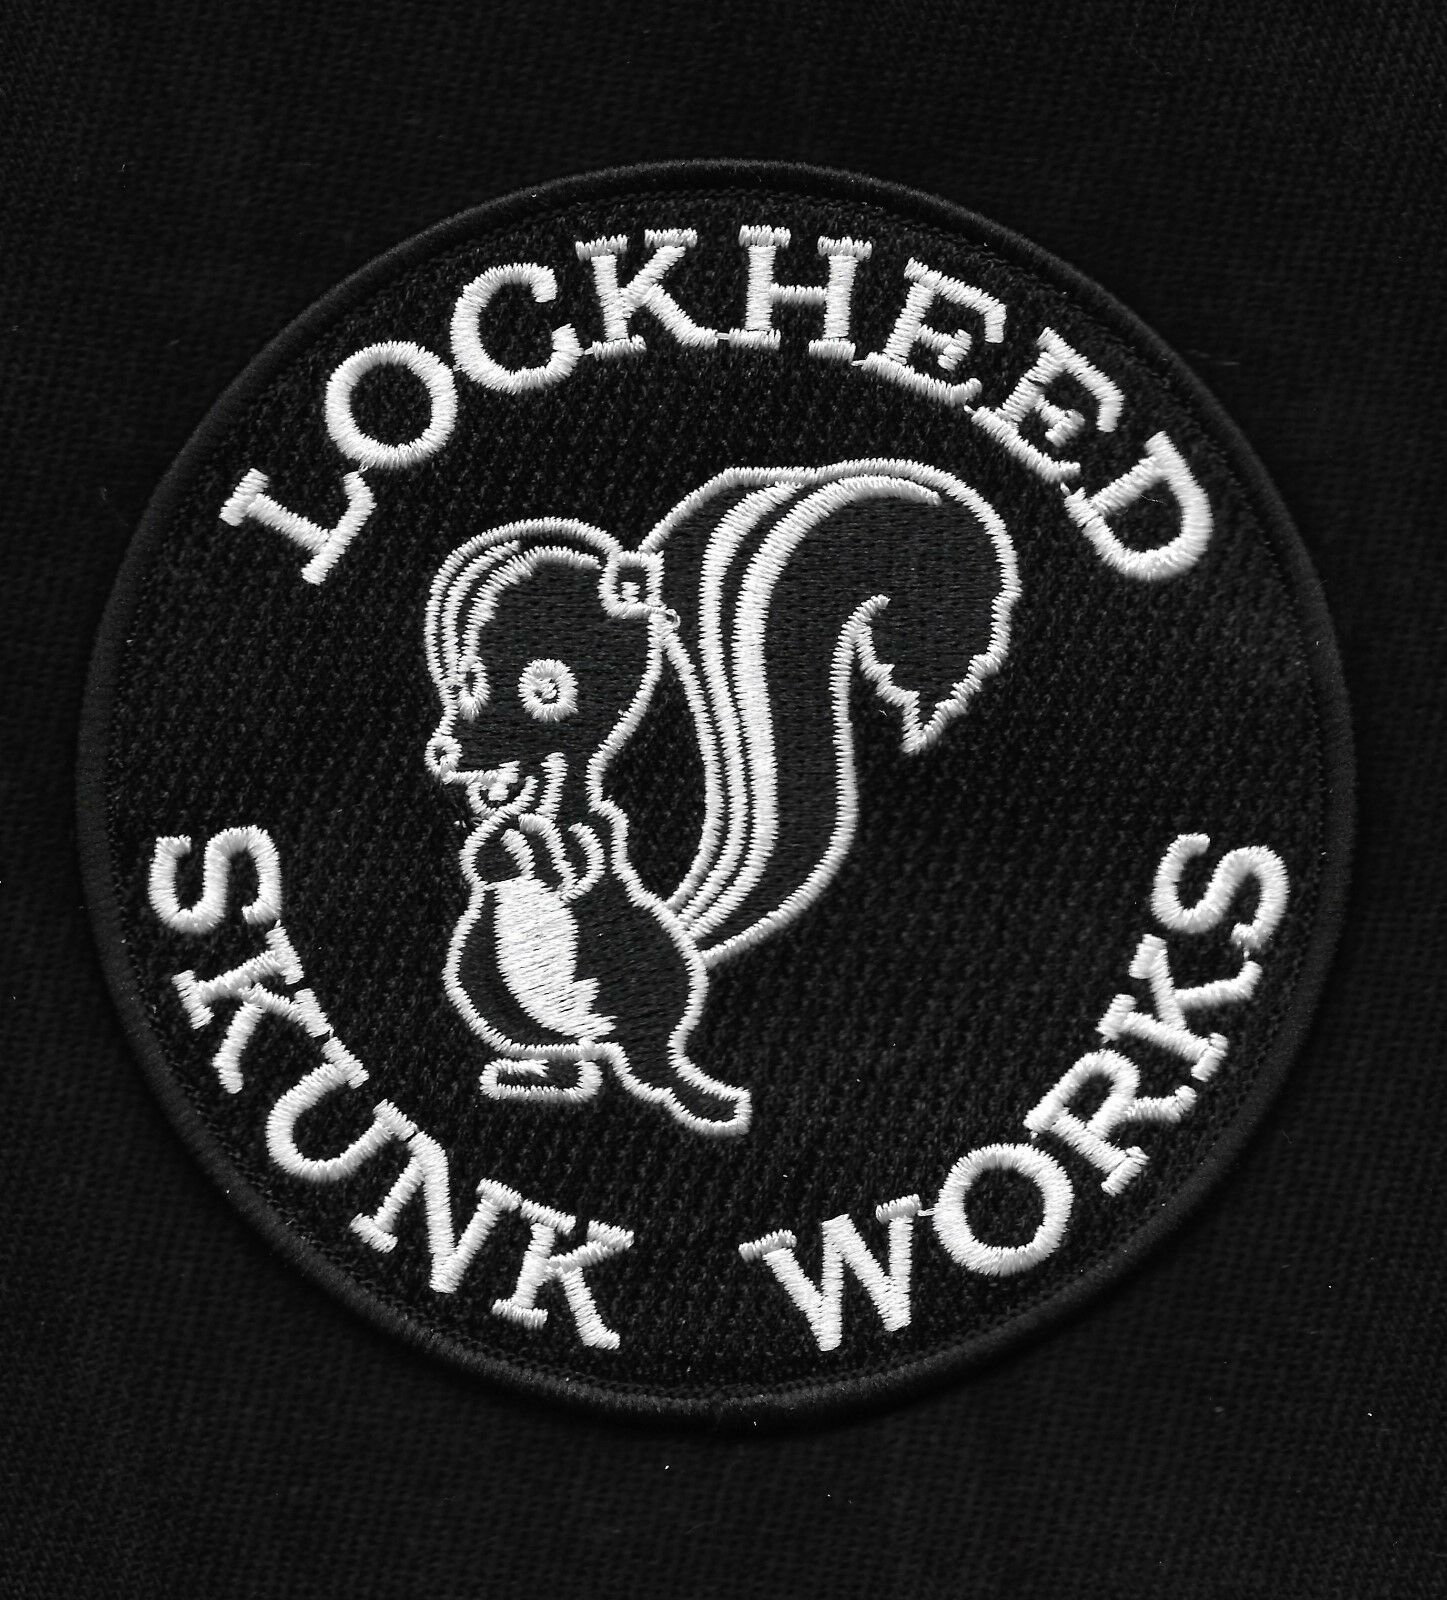 Usaf Lockheed Martin Skunk Works Aircraft Design Military Collectors Patch